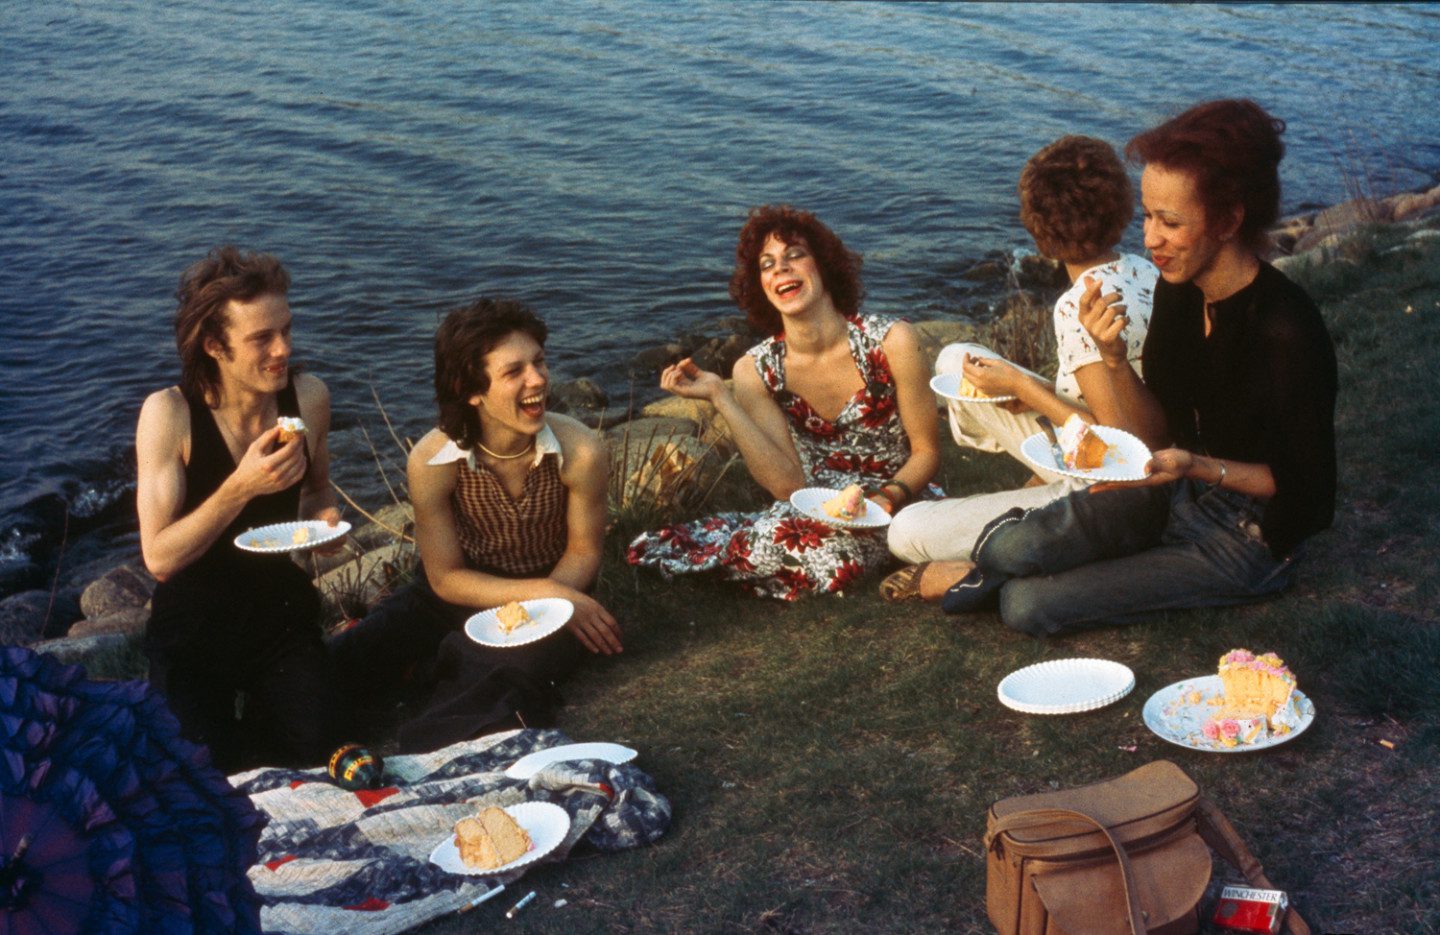 A group sits next to water and has a picnic